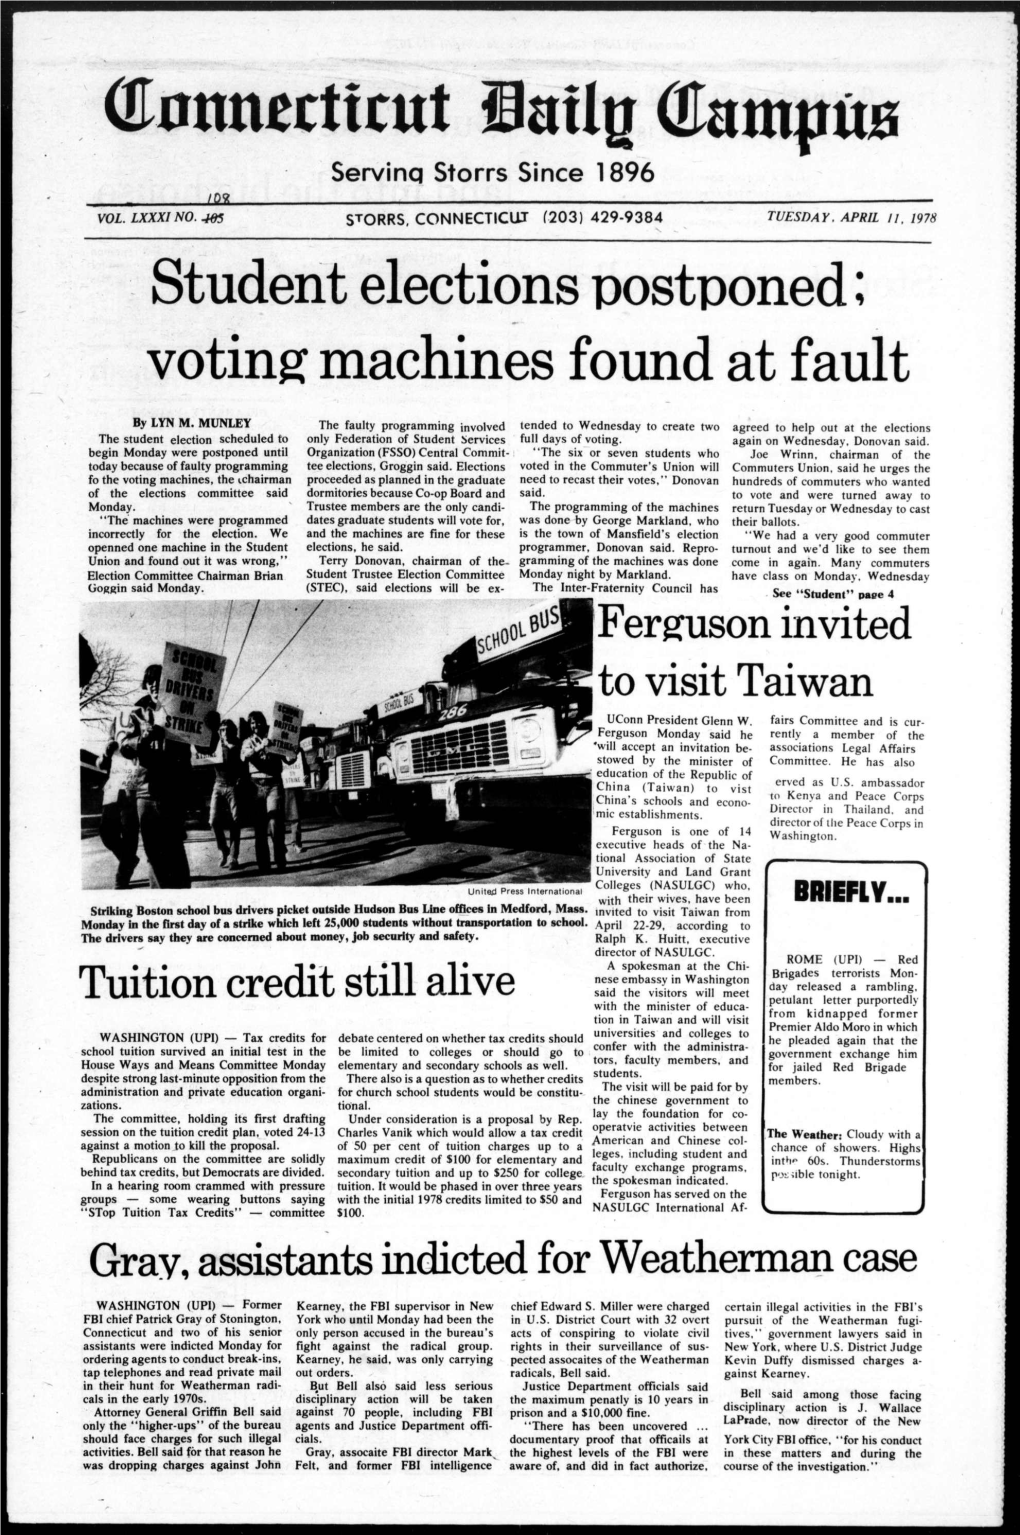 Student Elections Postponed; Voting Machines Found at Fault